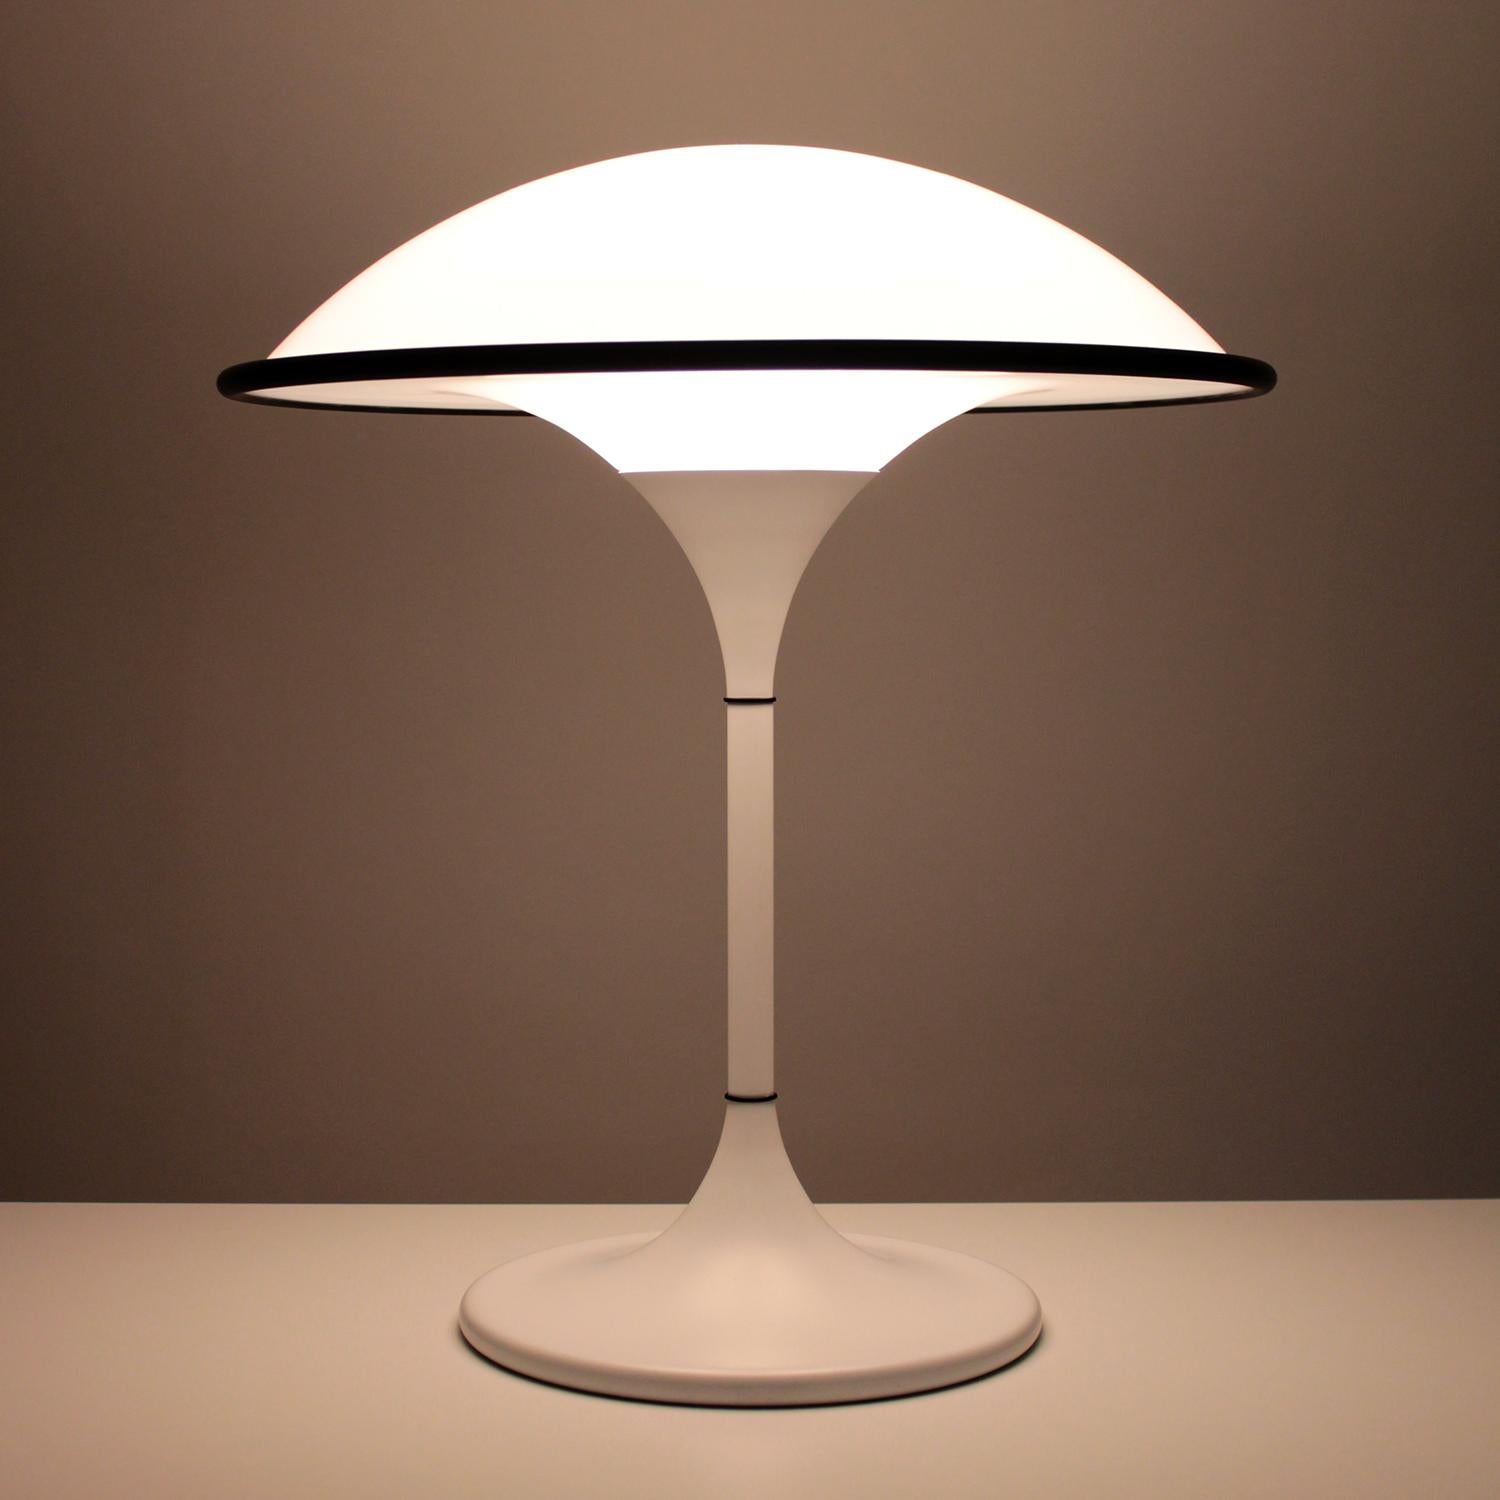 Cosmos table lamp - designed by Preben Jacobsen in 1984 and produced by Fog & Mørup. Very stylish Danish modern white table lamp in rare excellent vintage condition.

A white round metal base, emerging into a white metal stem with two thin black